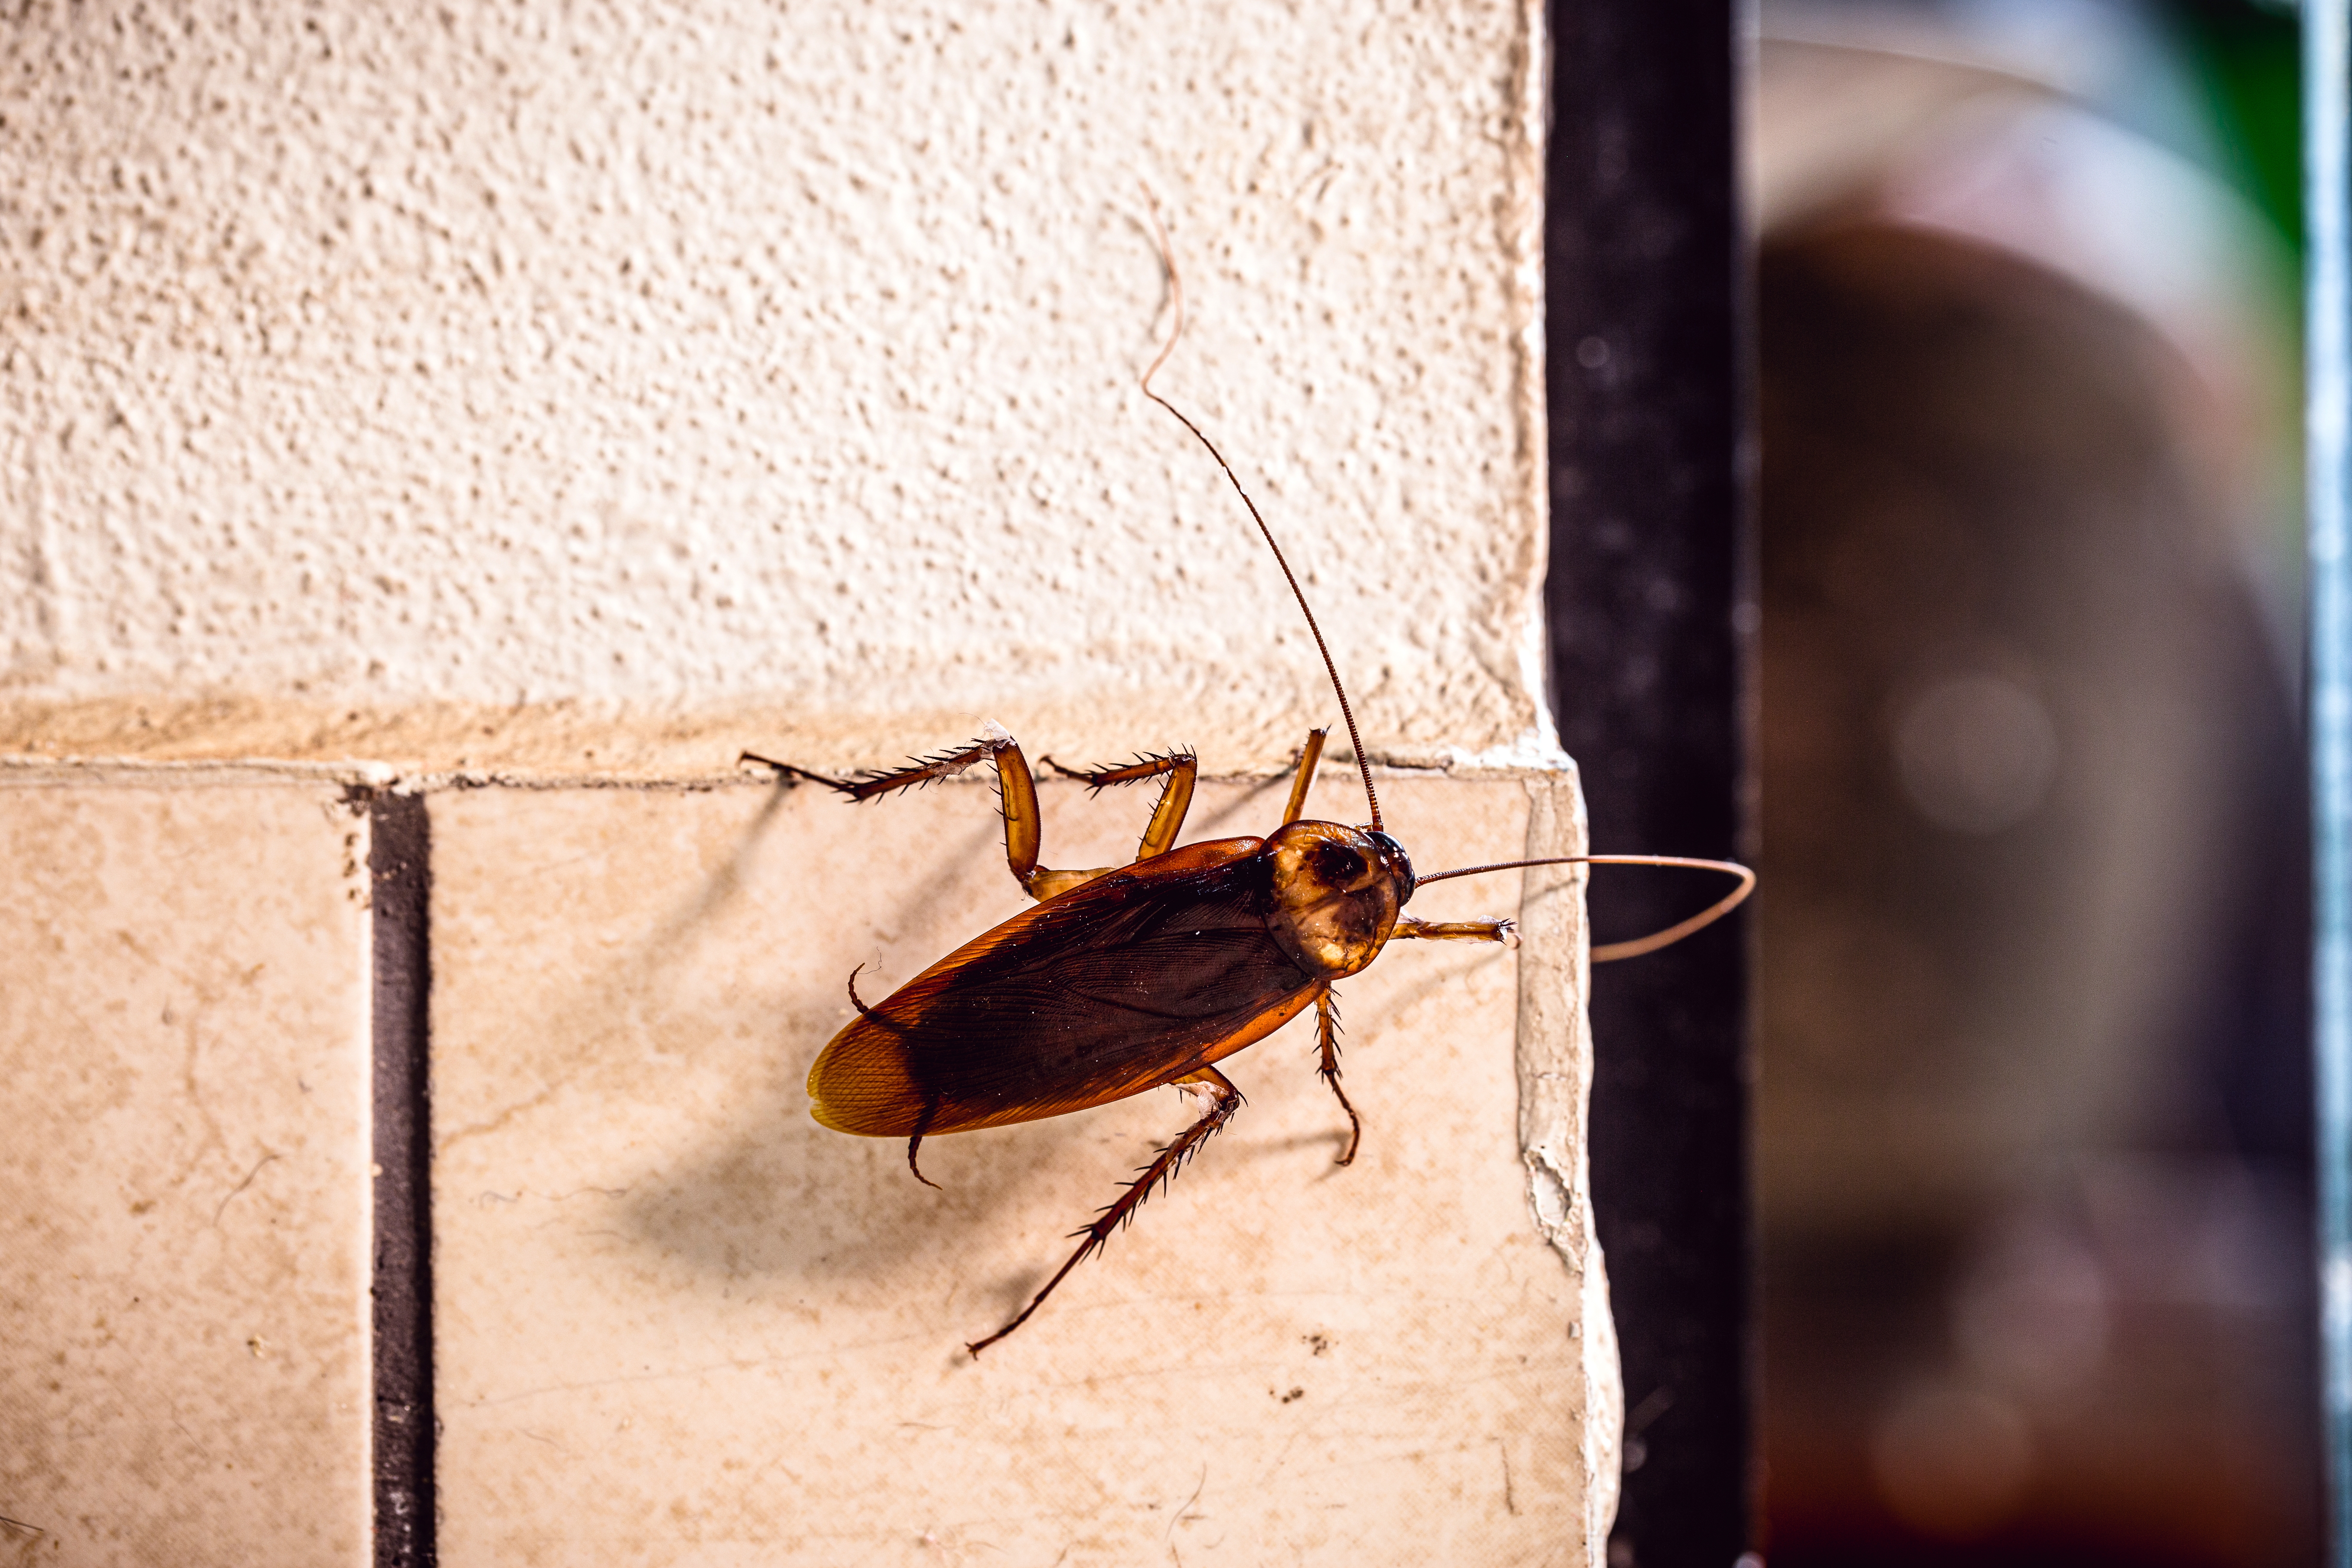 A cockroach on the wall | Source: Shutterstock